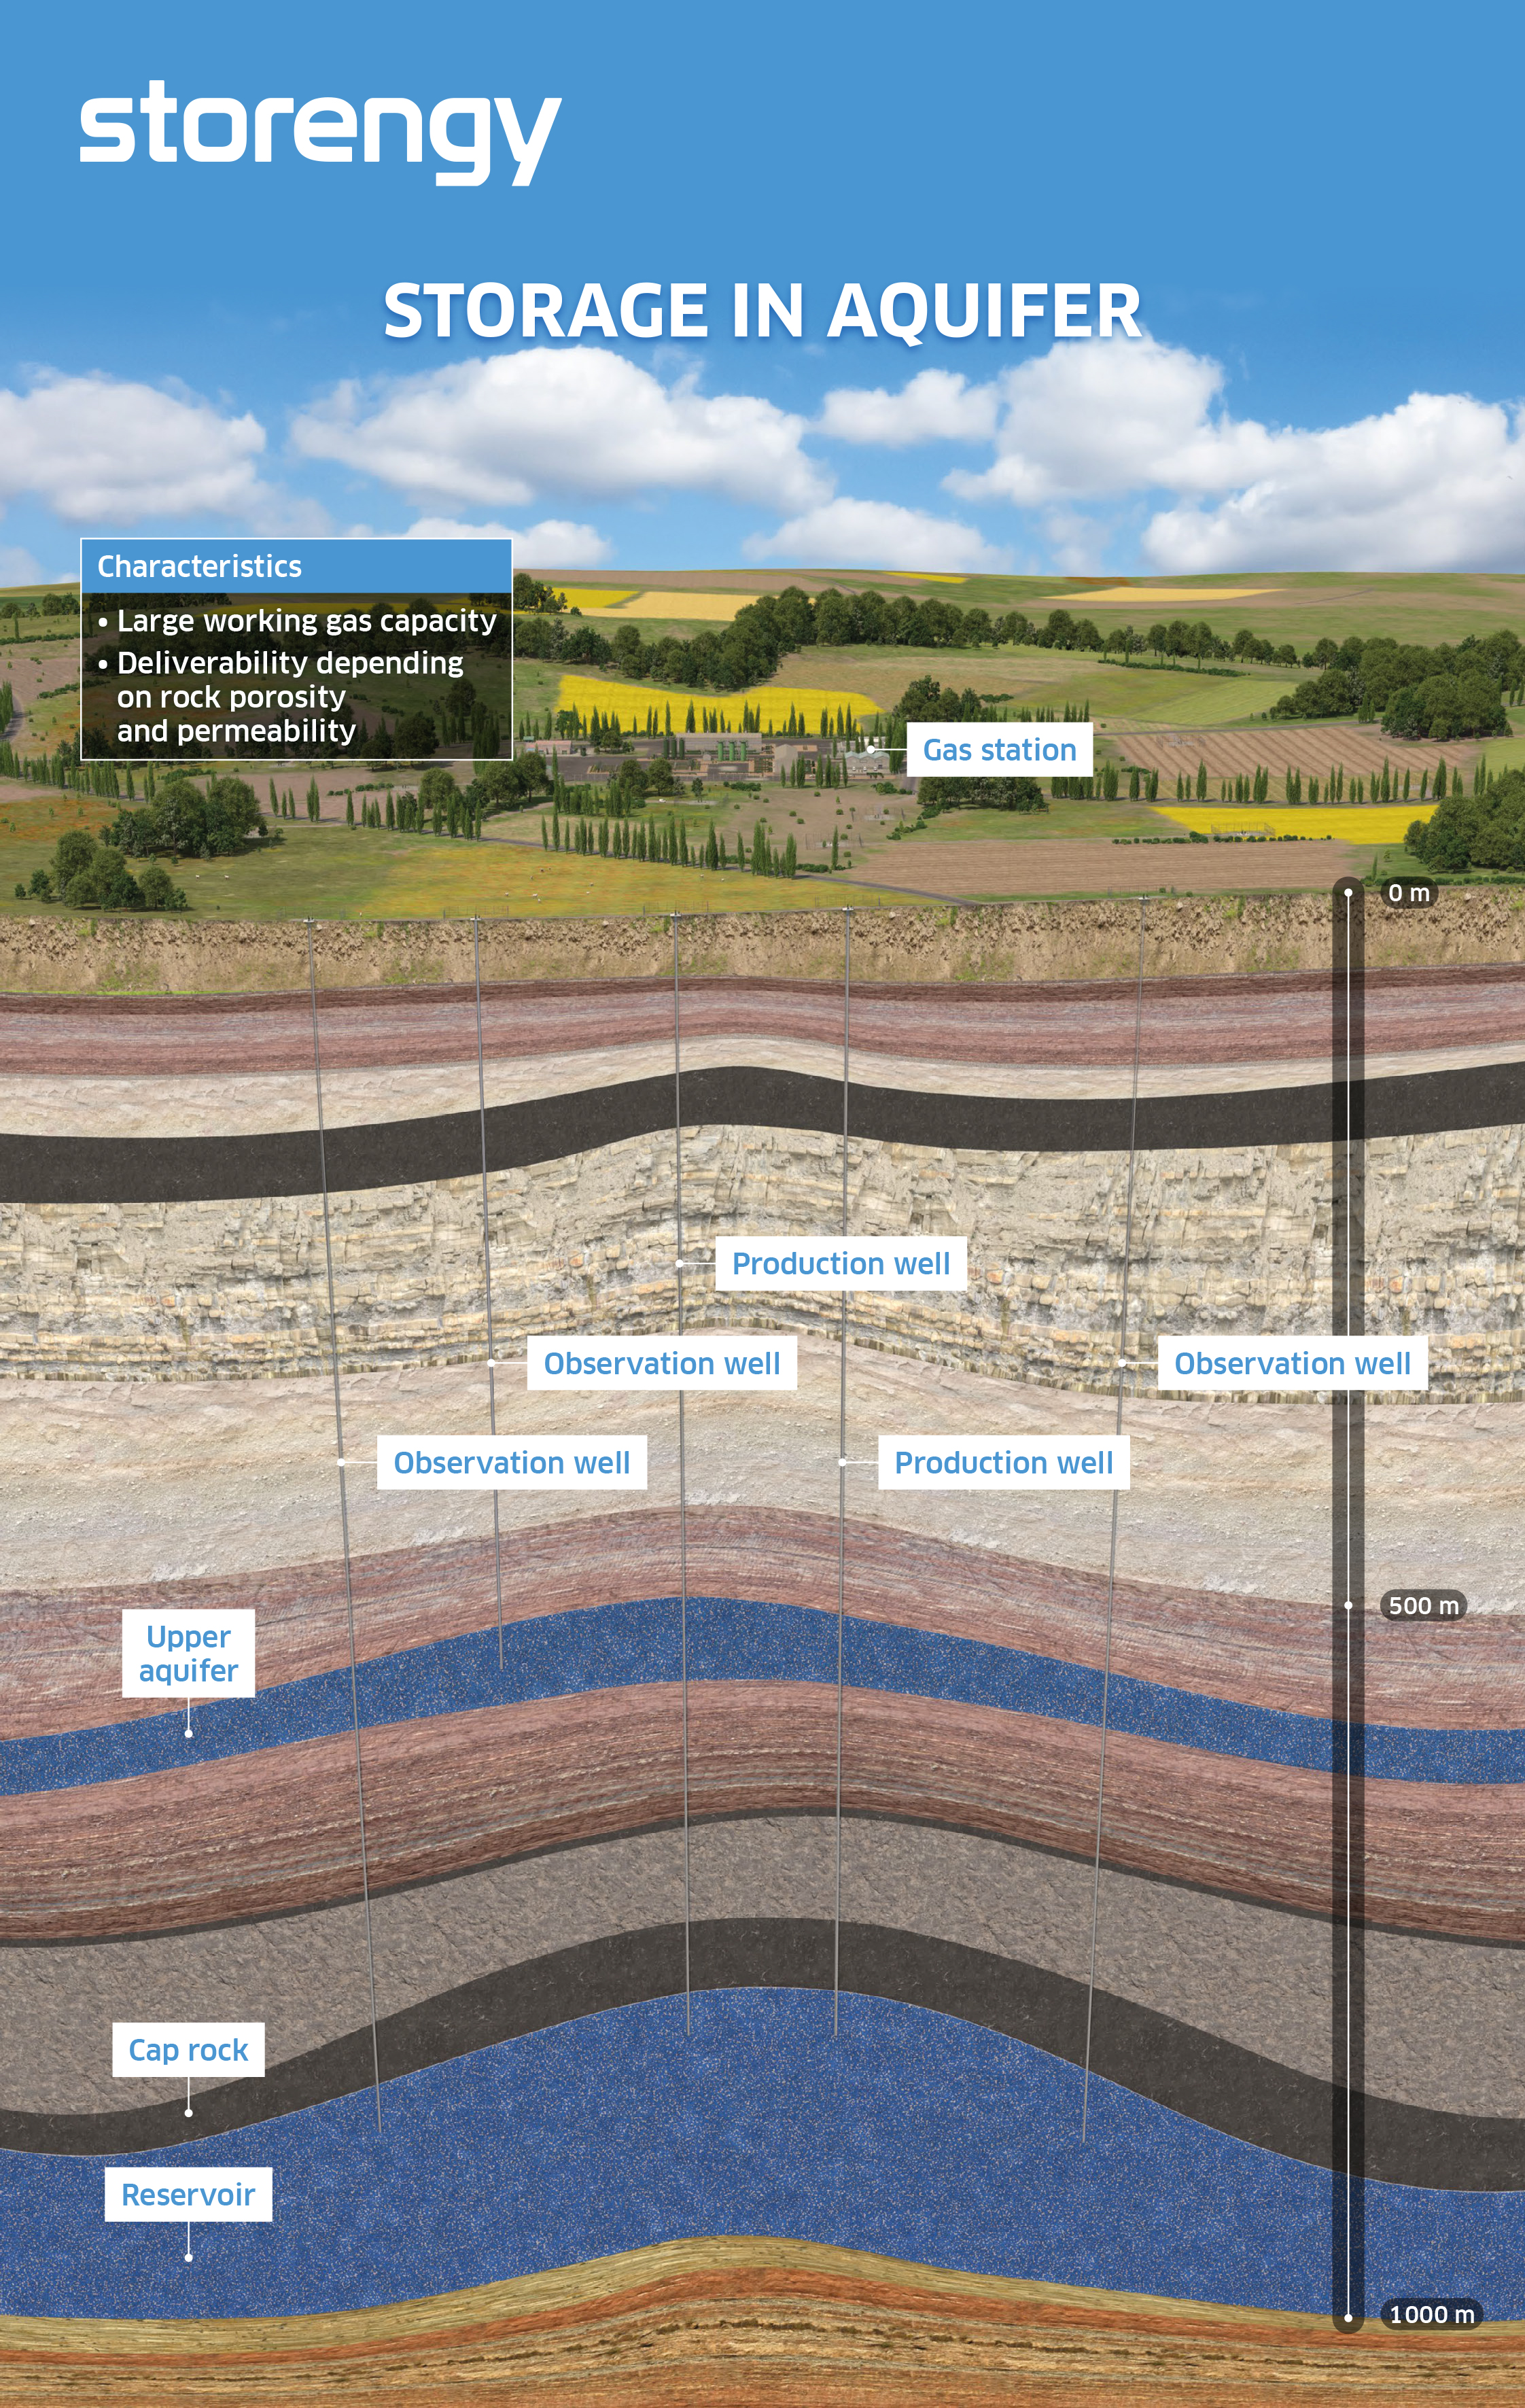 Underground gas storage cross-section in an aquifer. find the detailed description below the image